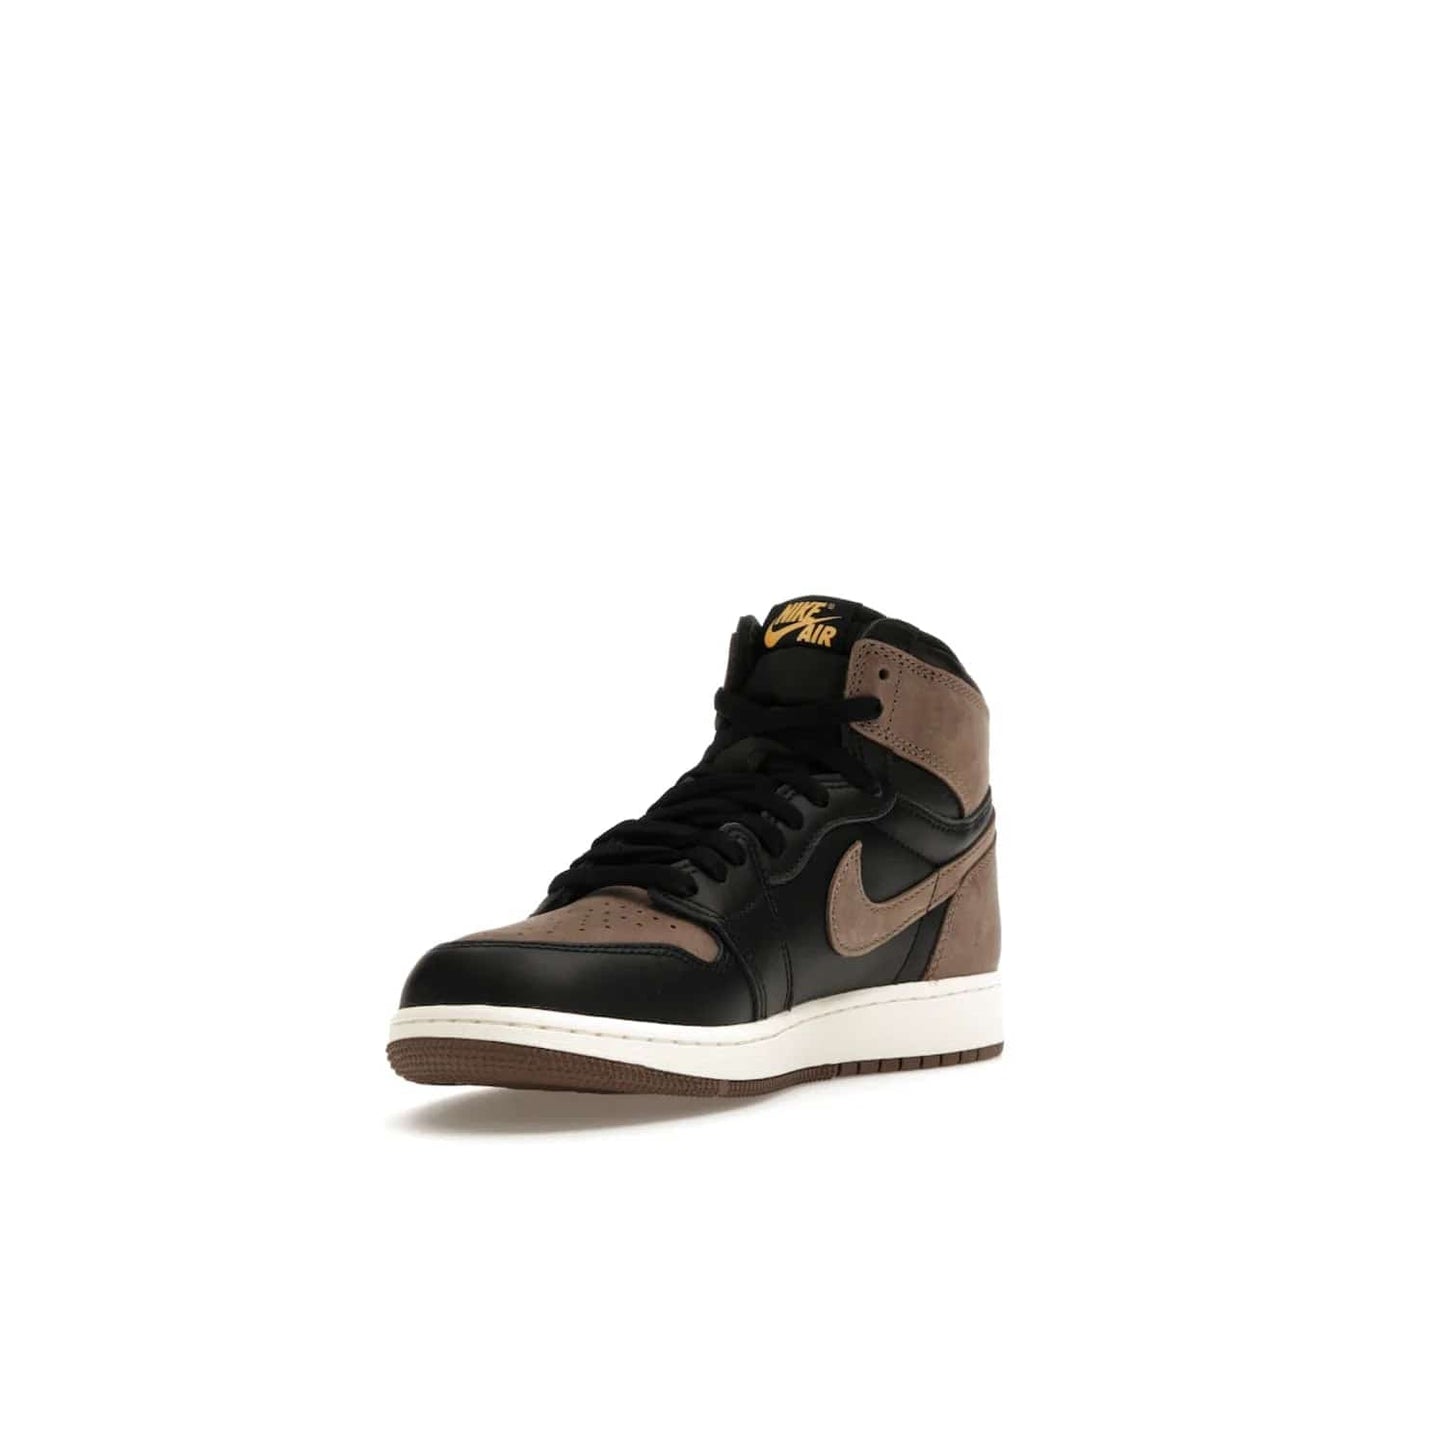 Jordan 1 Retro High OG Palomino (GS) - Image 14 - Only at www.BallersClubKickz.com - Introducing the luxurious Jordan 1 Retro High OG Palomino (GS). Featuring black leather with metallic gold and palomino accents, this sneaker is perfect for any occasion. Grab yours when they release on September 2nd of 2023.